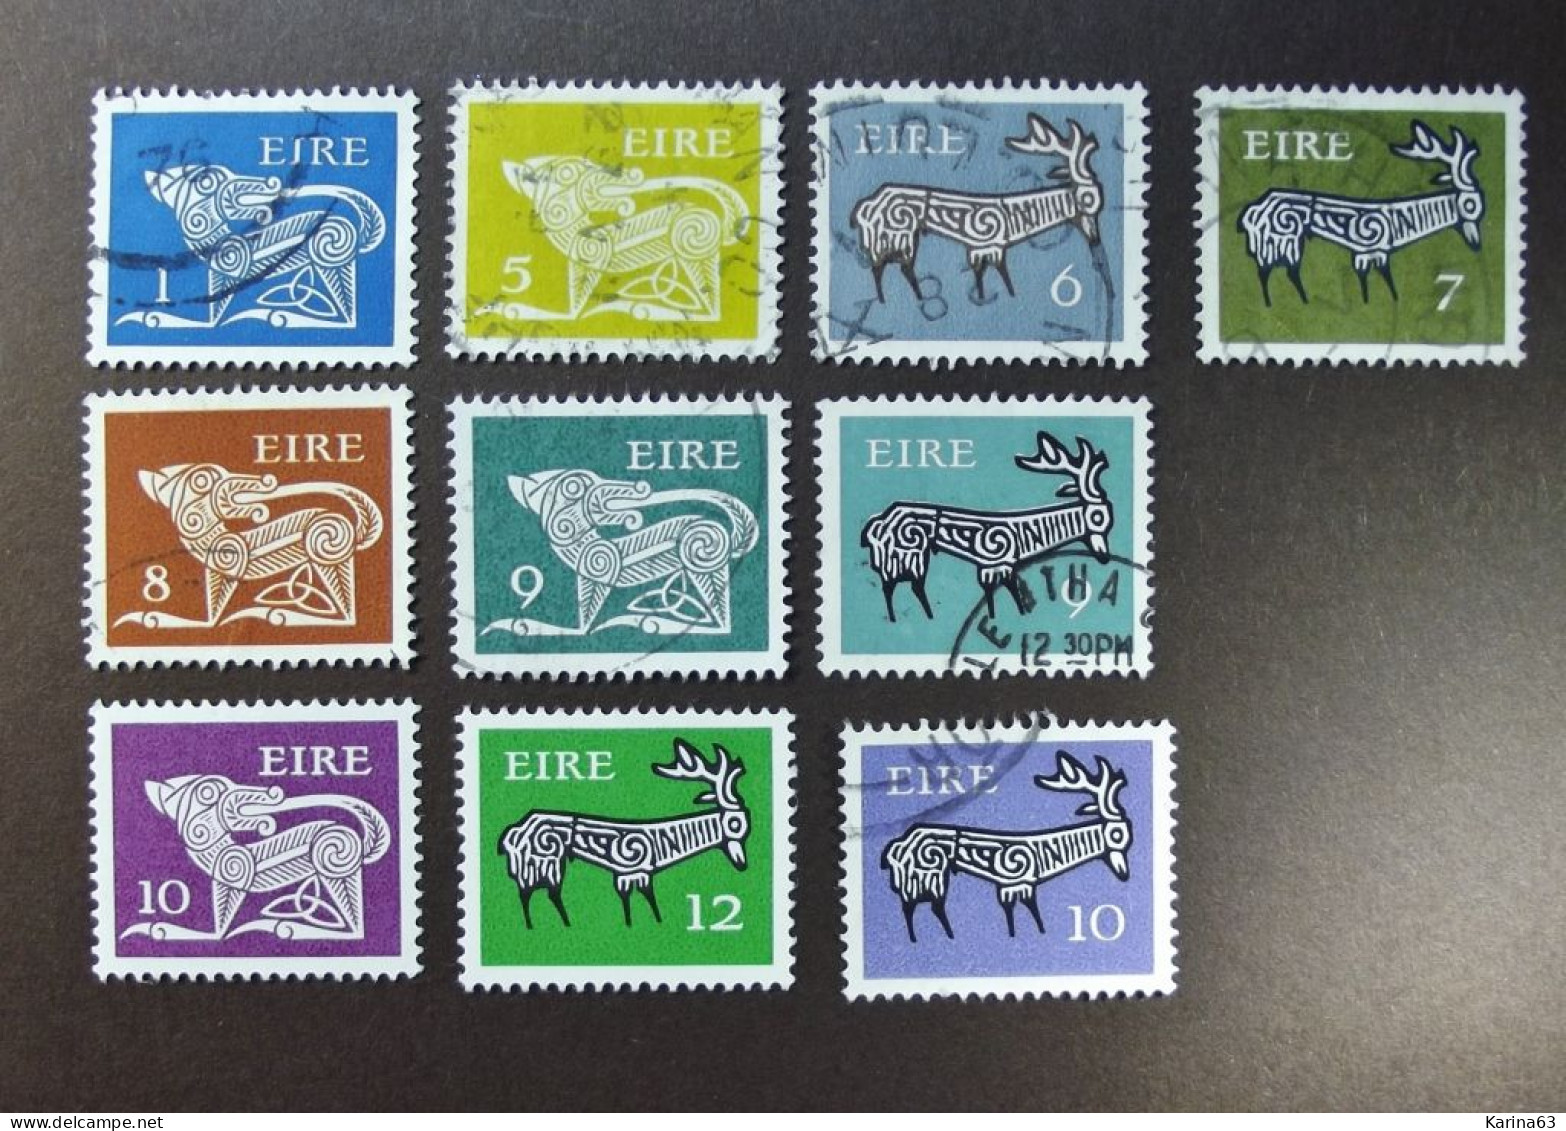 Ireland - Irelande - Eire 1974  Y & T N° 318A - 318E - 319 - 319A - 320A - 321 - 349 - 349A - 350A - 361 - 10 Val. Obl. - Used Stamps